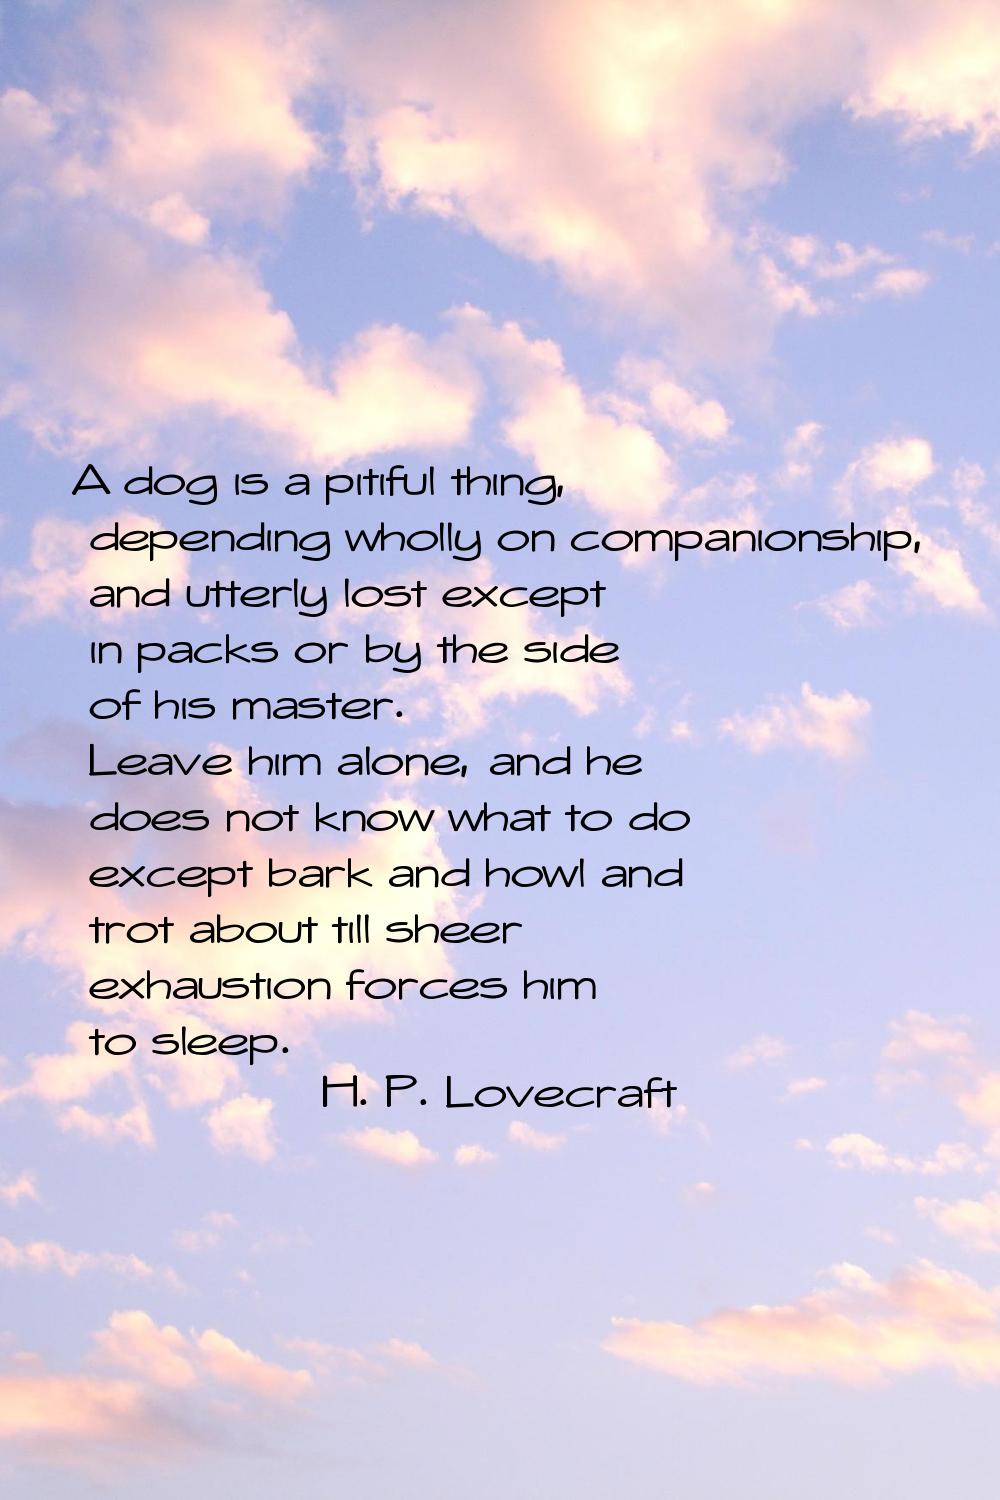 A dog is a pitiful thing, depending wholly on companionship, and utterly lost except in packs or by